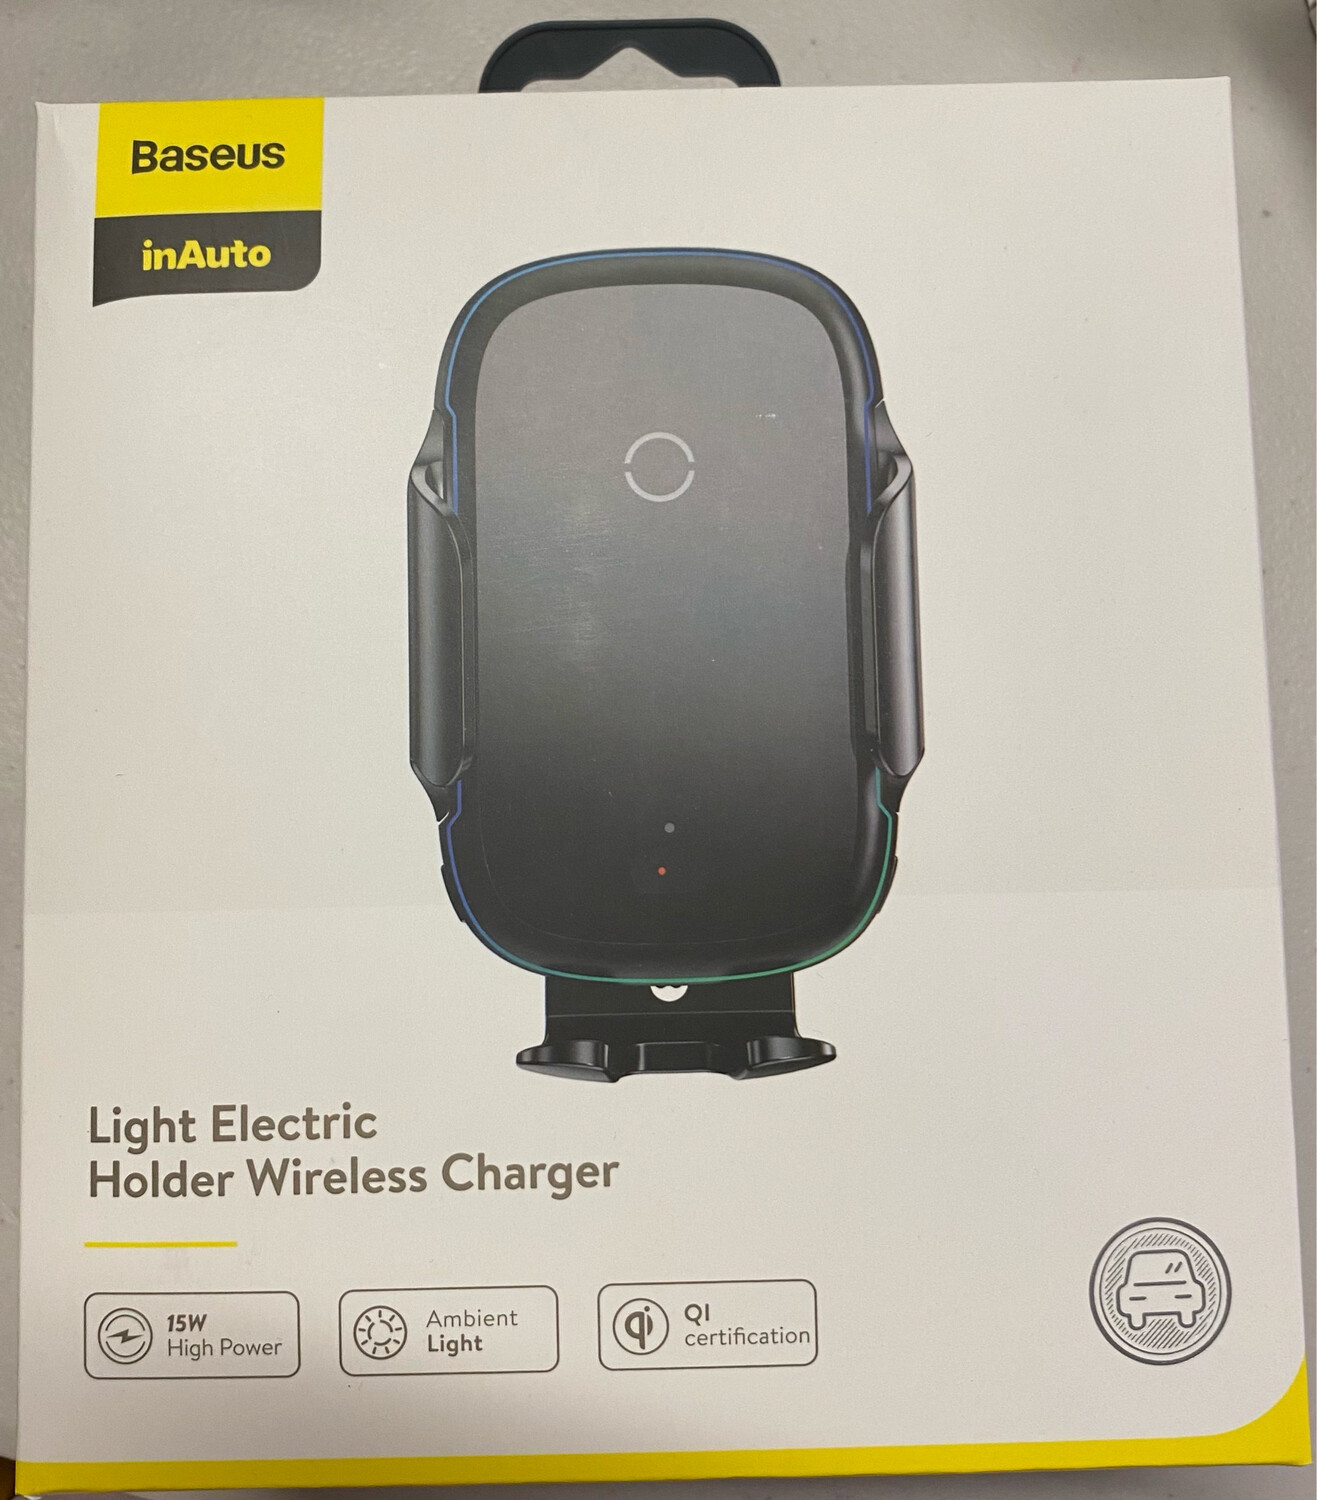 Baseus Light Electric Holder Wireless Charger